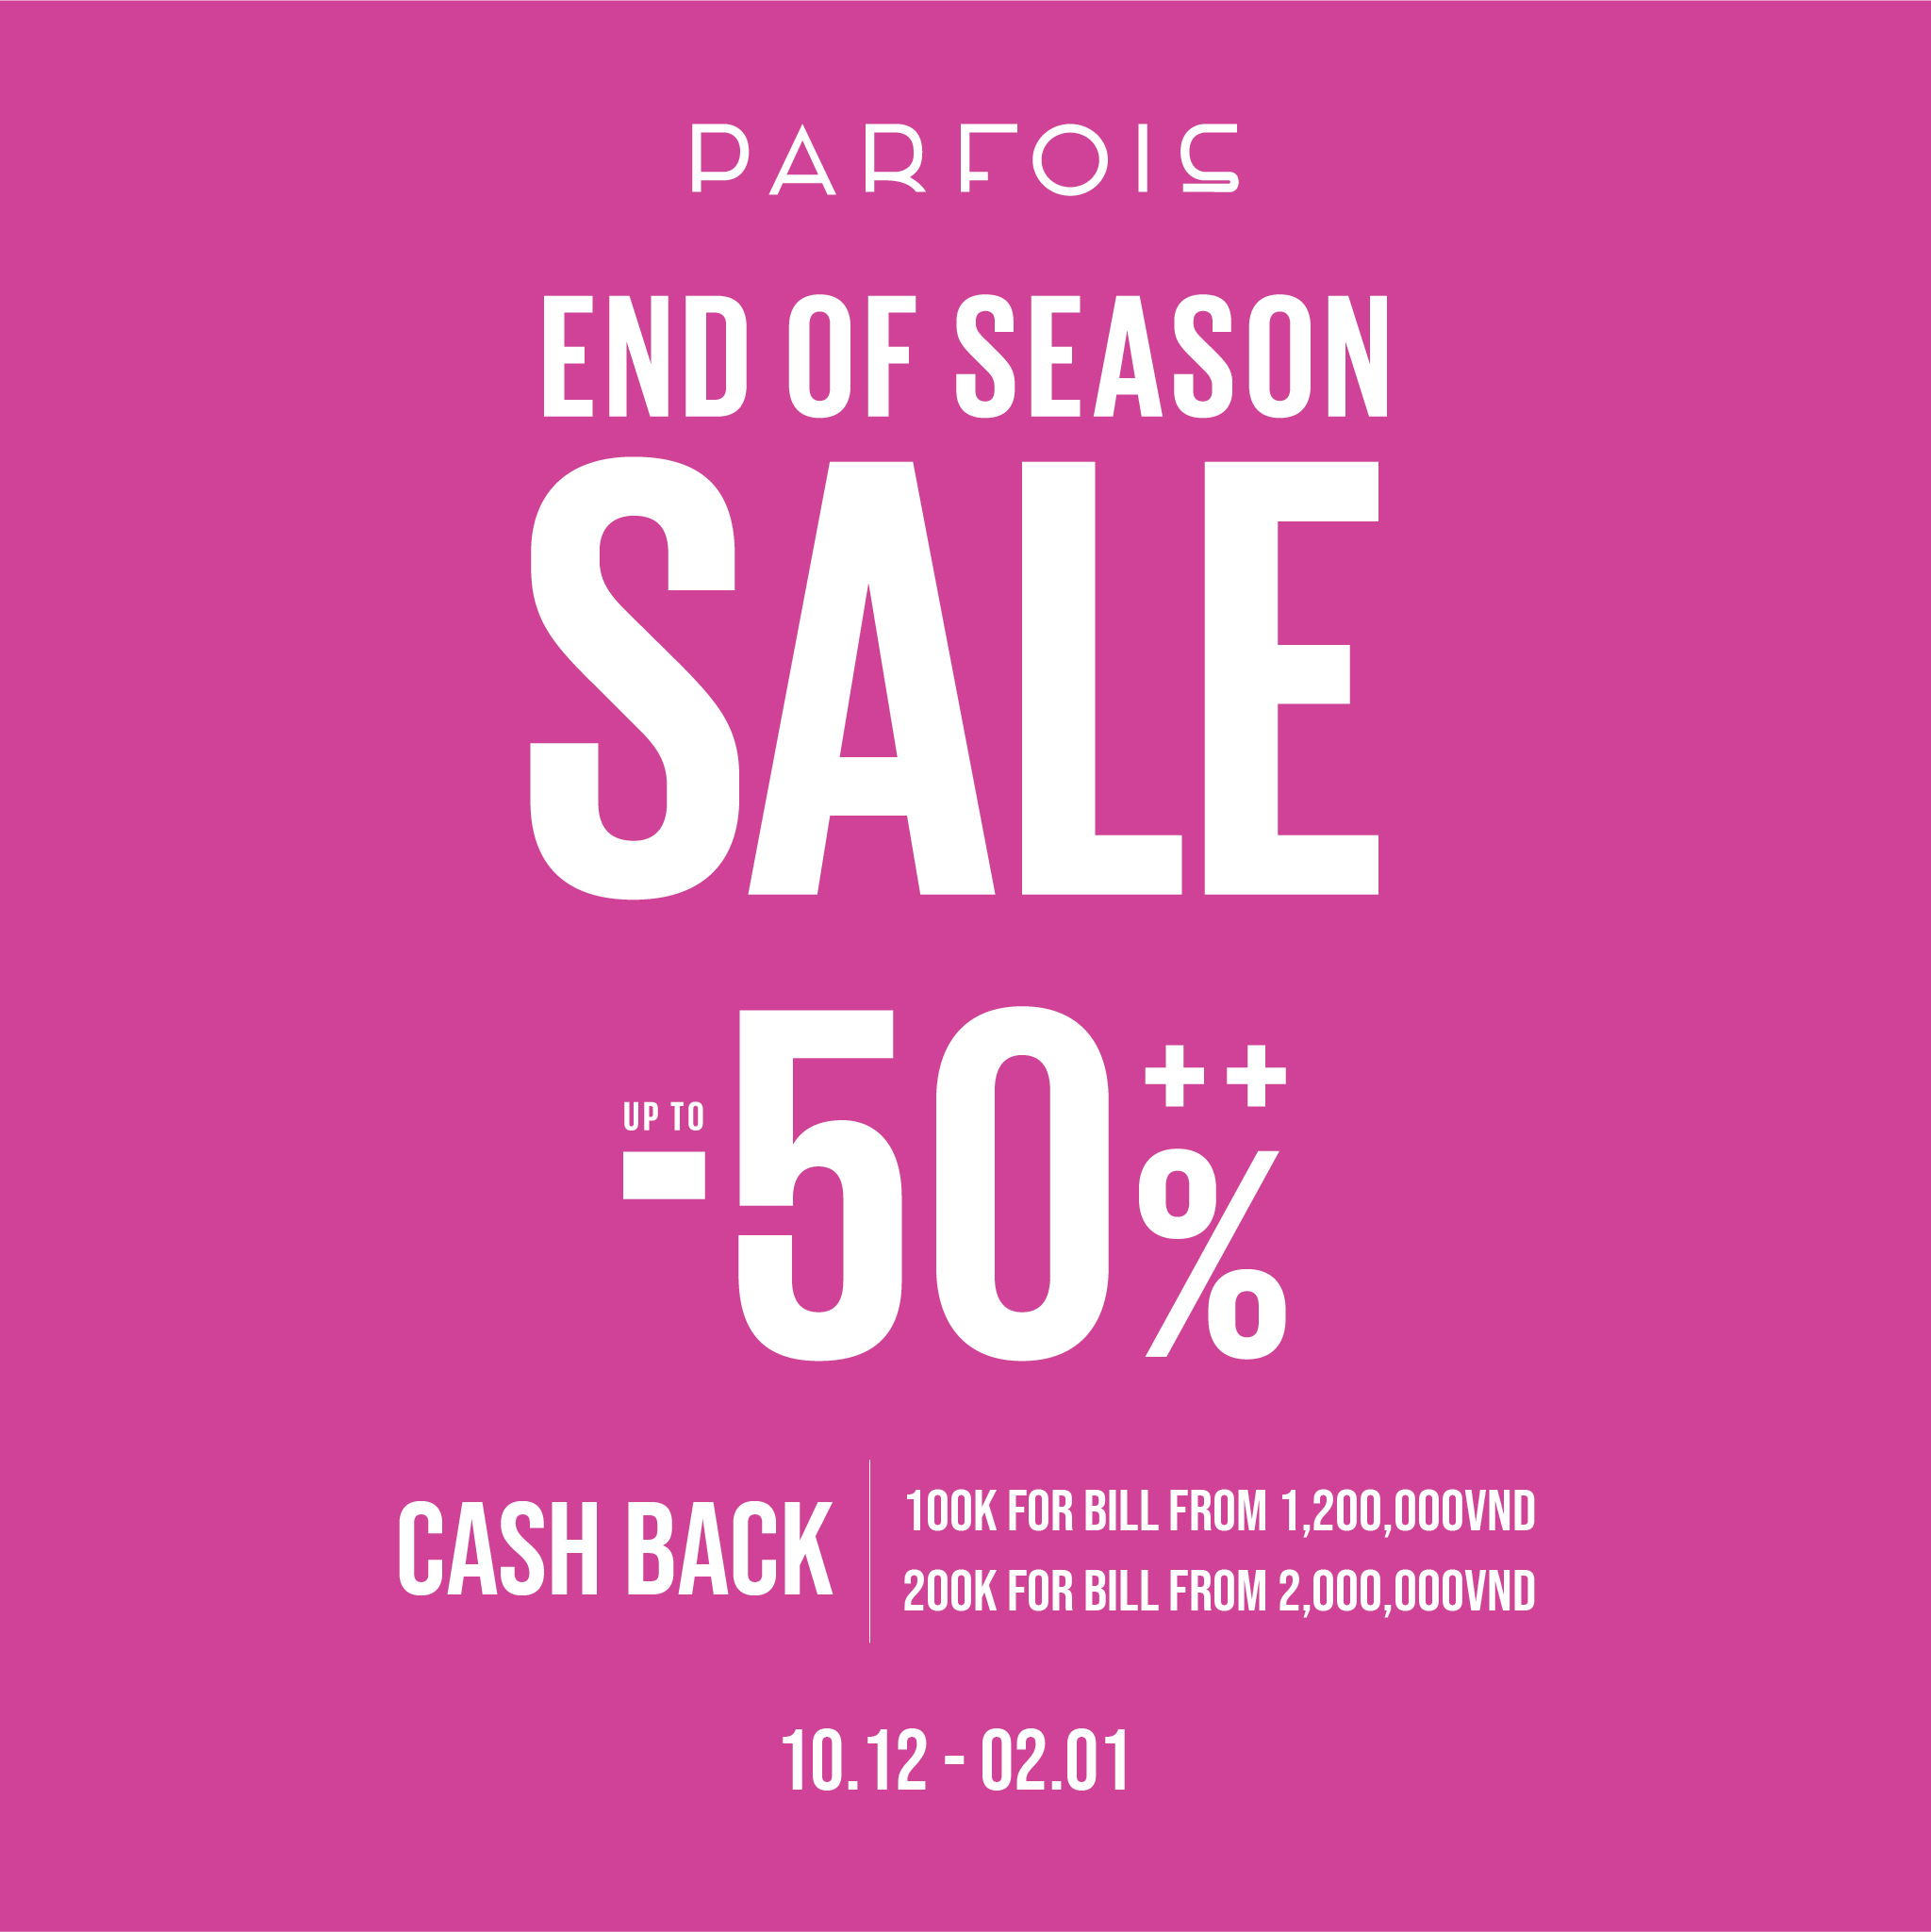 END OF SEASON SALE UP TO 50%++